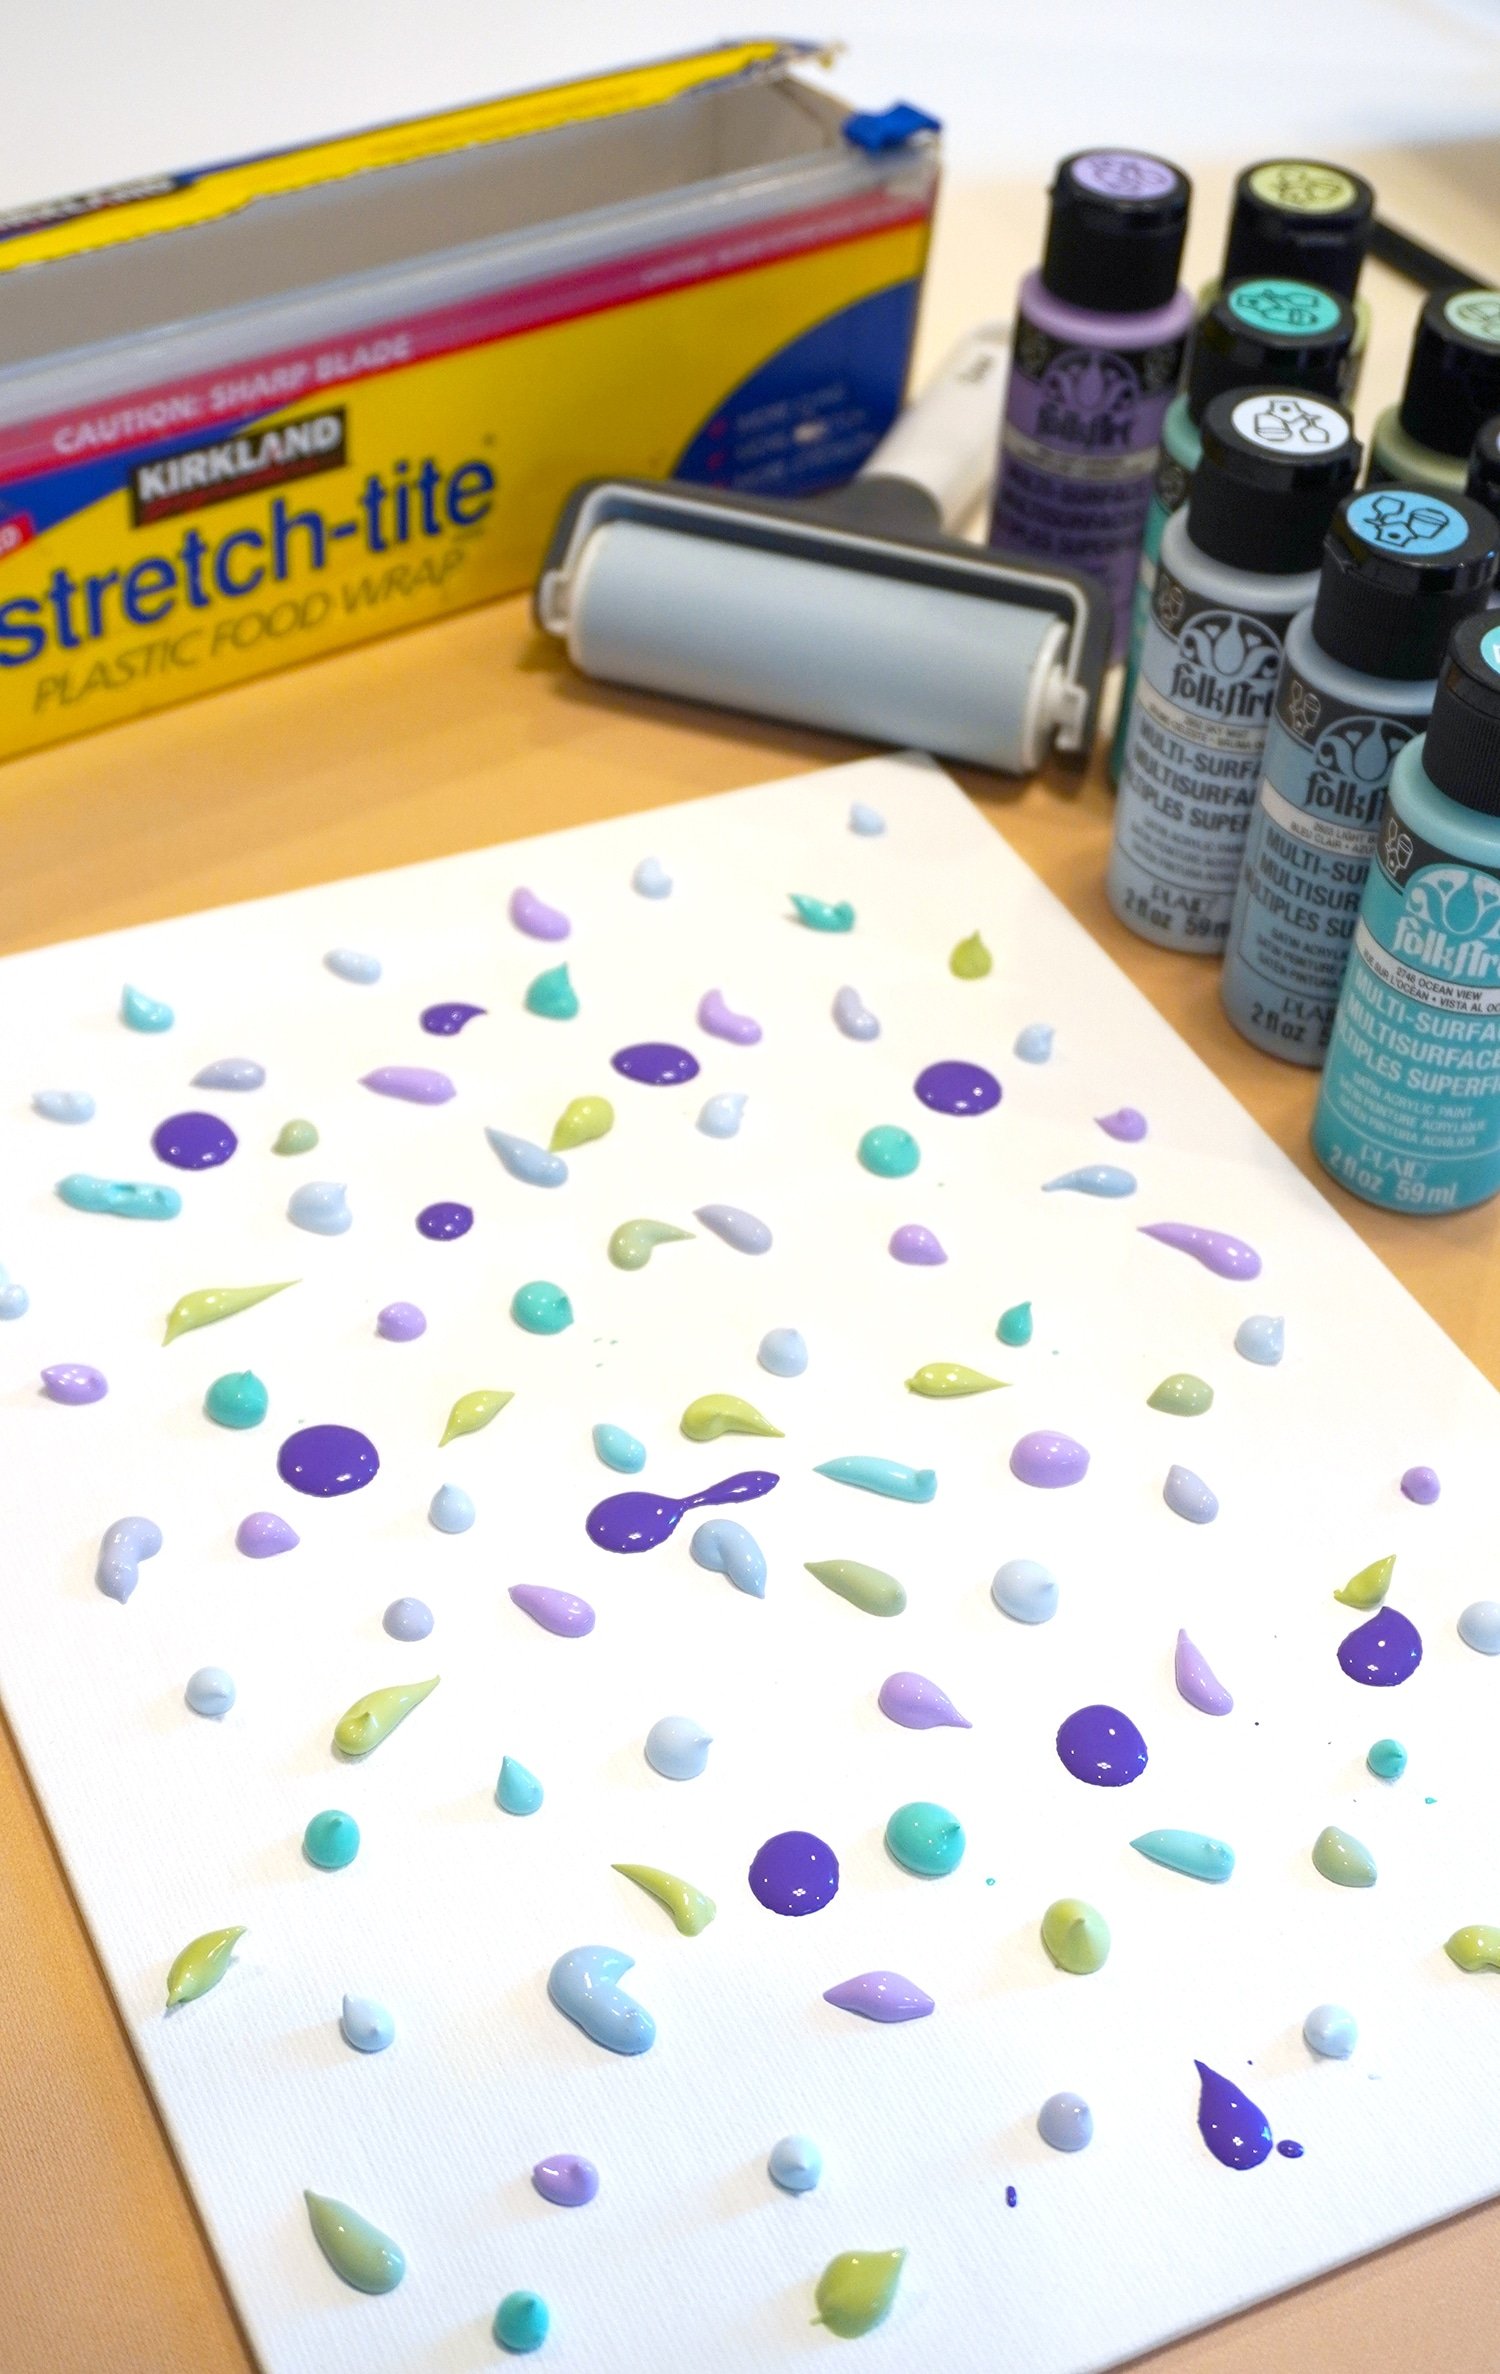 Paint drops on canvas with plastic wrap, brayer, and bottles of paint in background